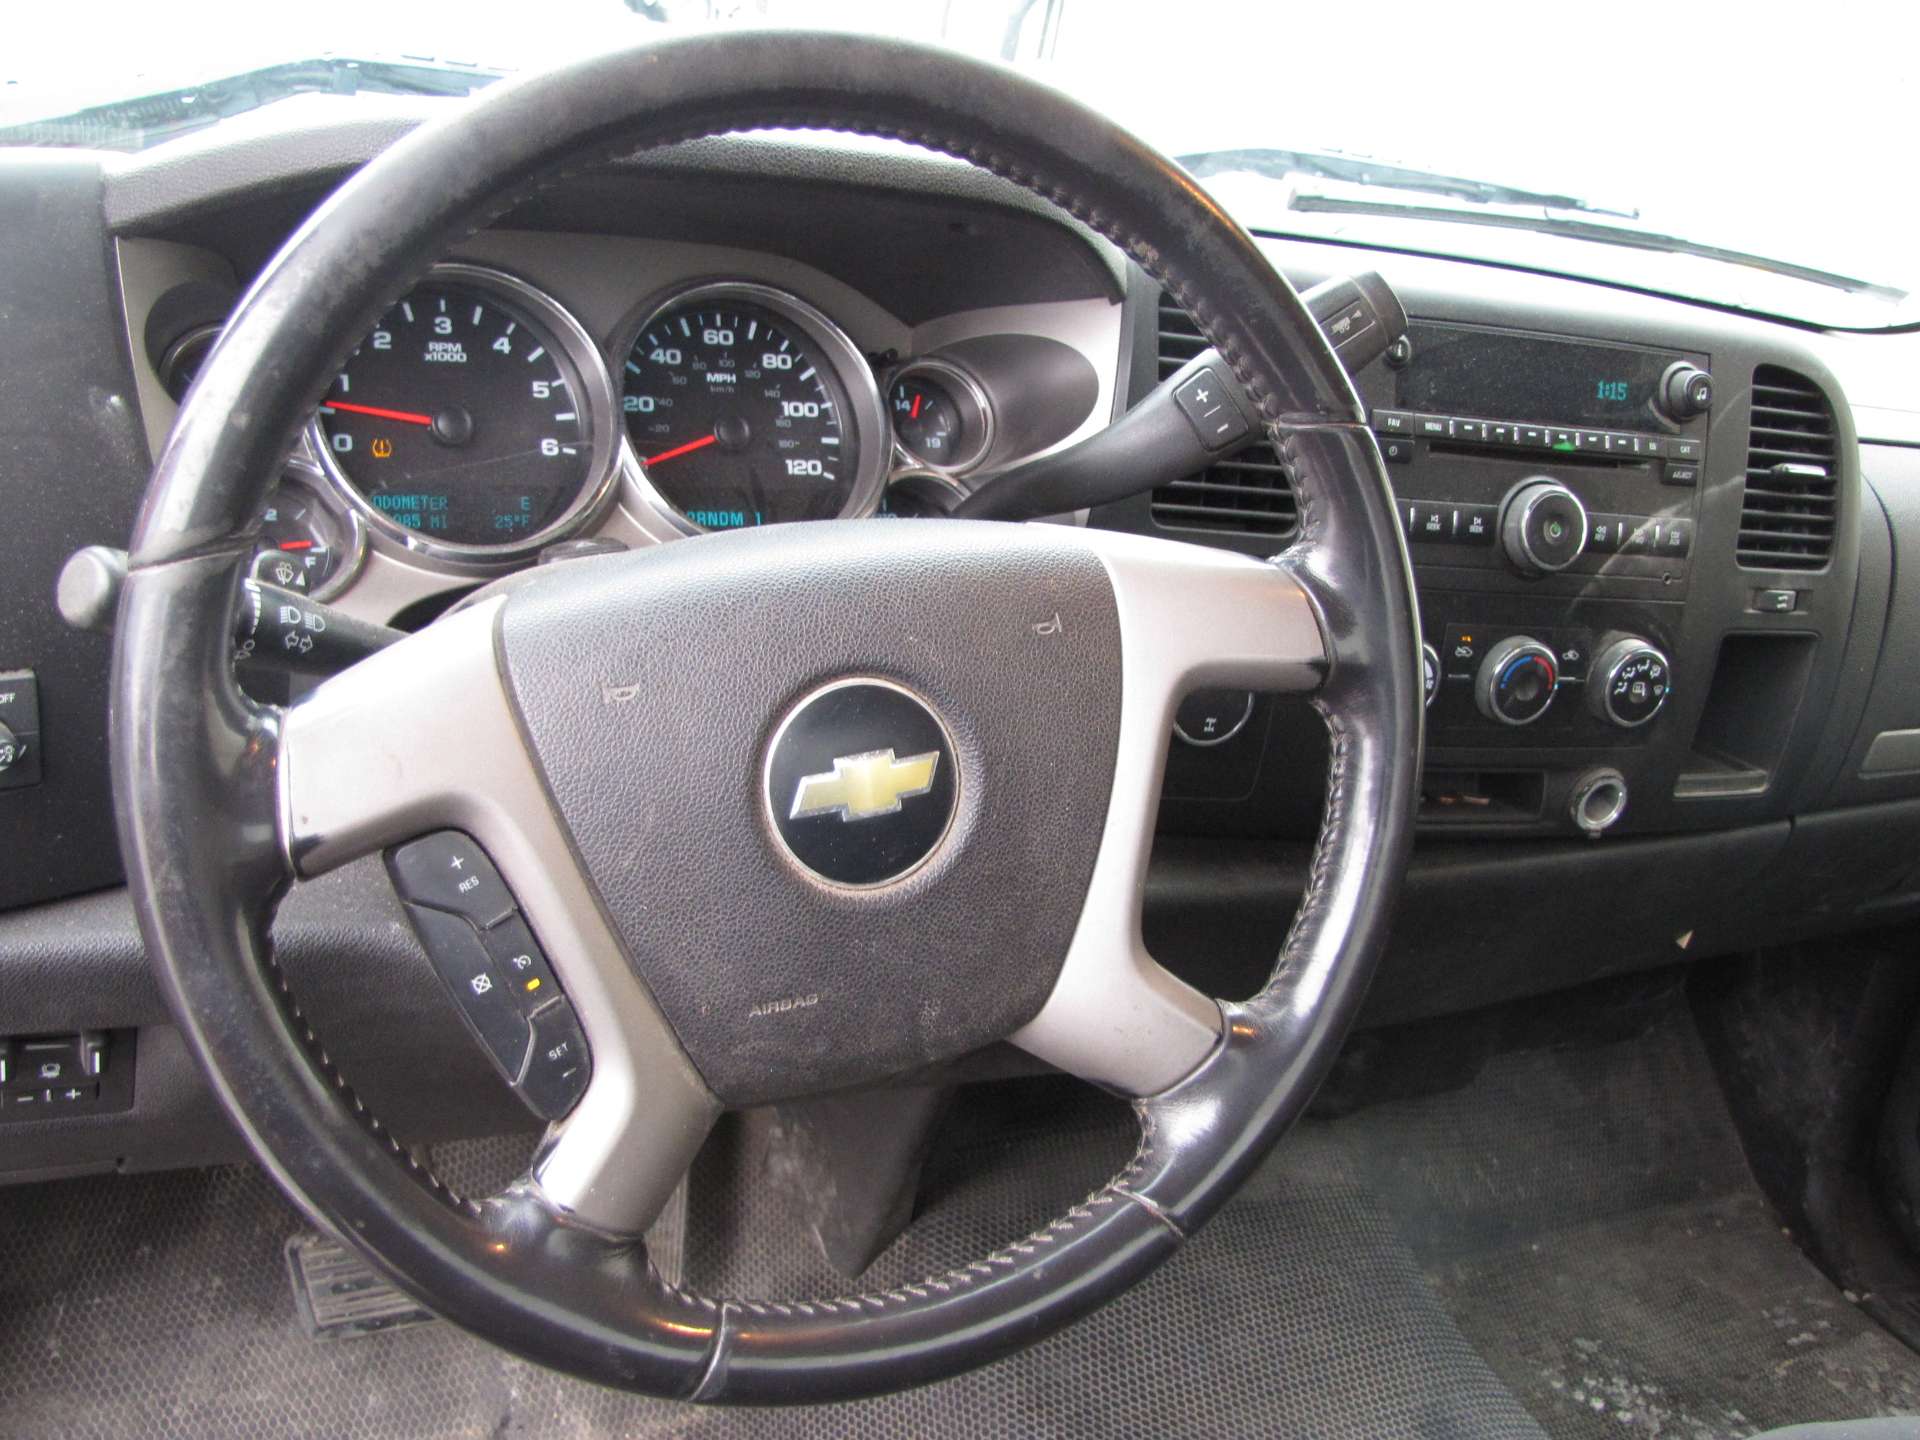 2009 Chevy 2500 HD LT pickup truck - Image 60 of 69